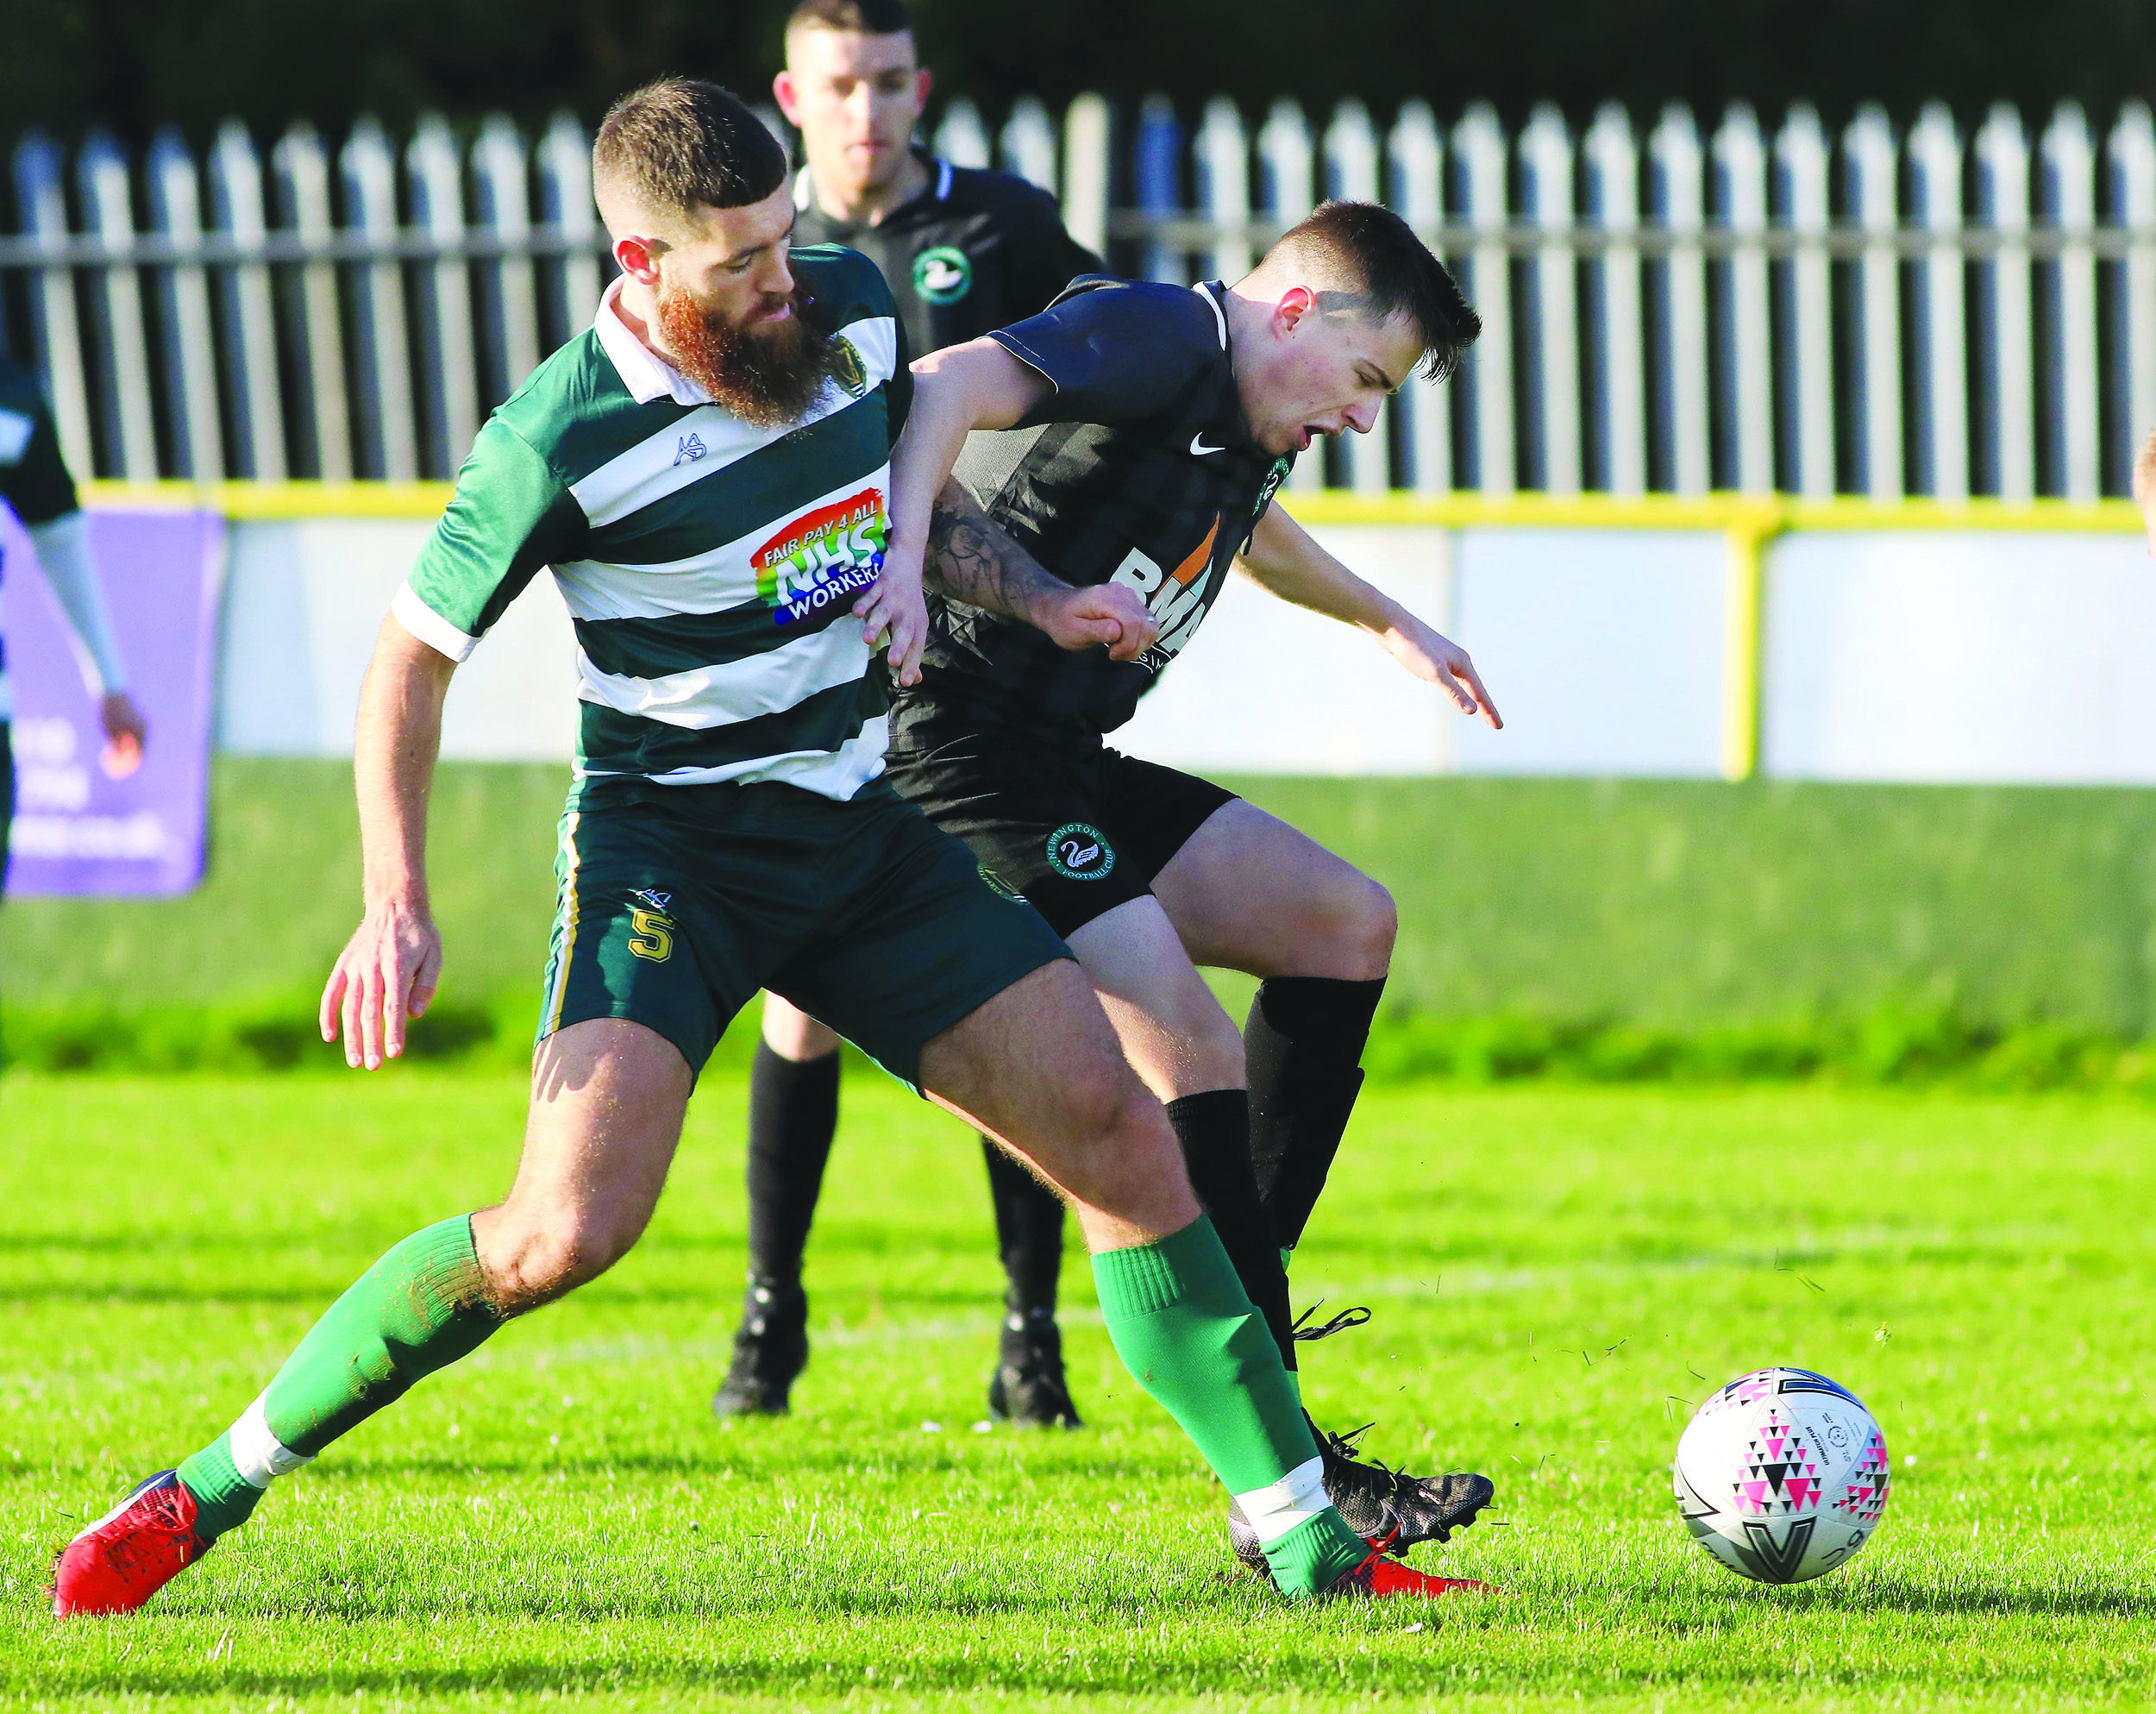 Belfast Celtic and Newington are both due to take part in the delayed Irish Cup in May